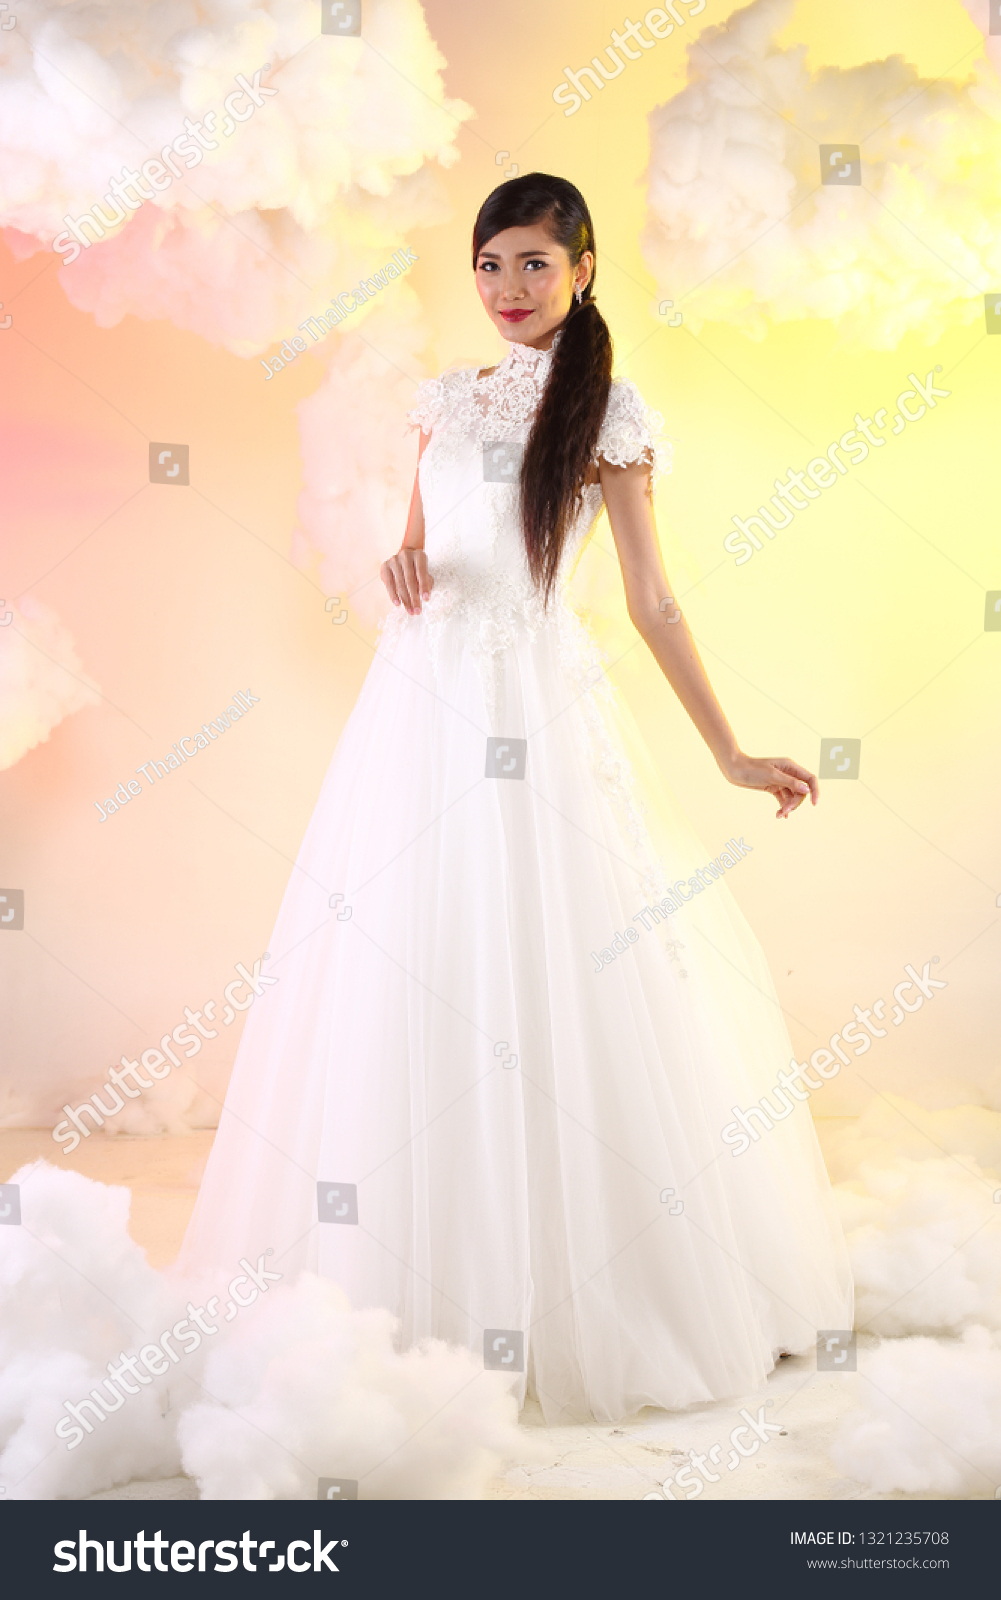 https://image.shutterstock.com/z/stock-photo-lovely-asian-beautiful-woman-bride-in-white-wedding-gown-dress-with-lace-veil-black-hair-studio-1321235708.jpg